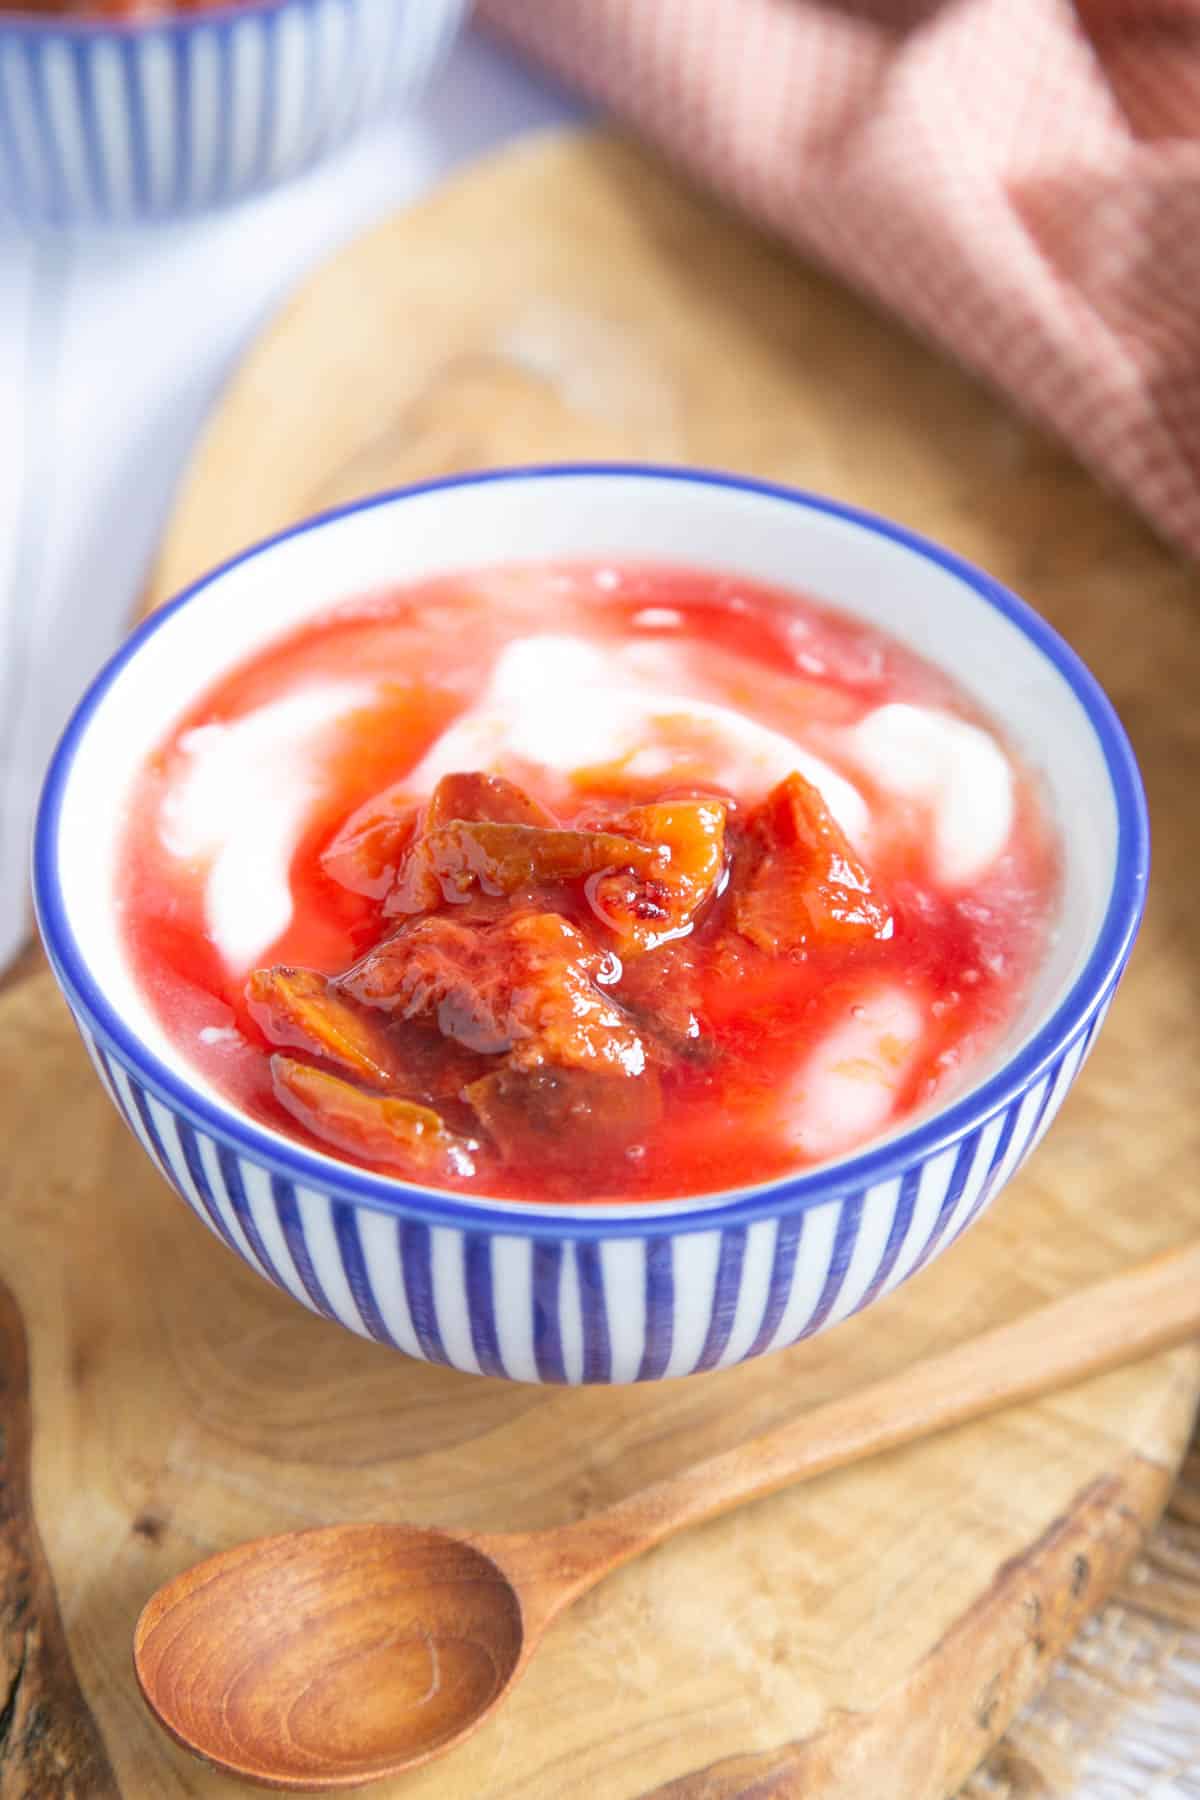 Delicious plum compote served as a topping to yoghurt; a wooden teaspoon in the foreground.